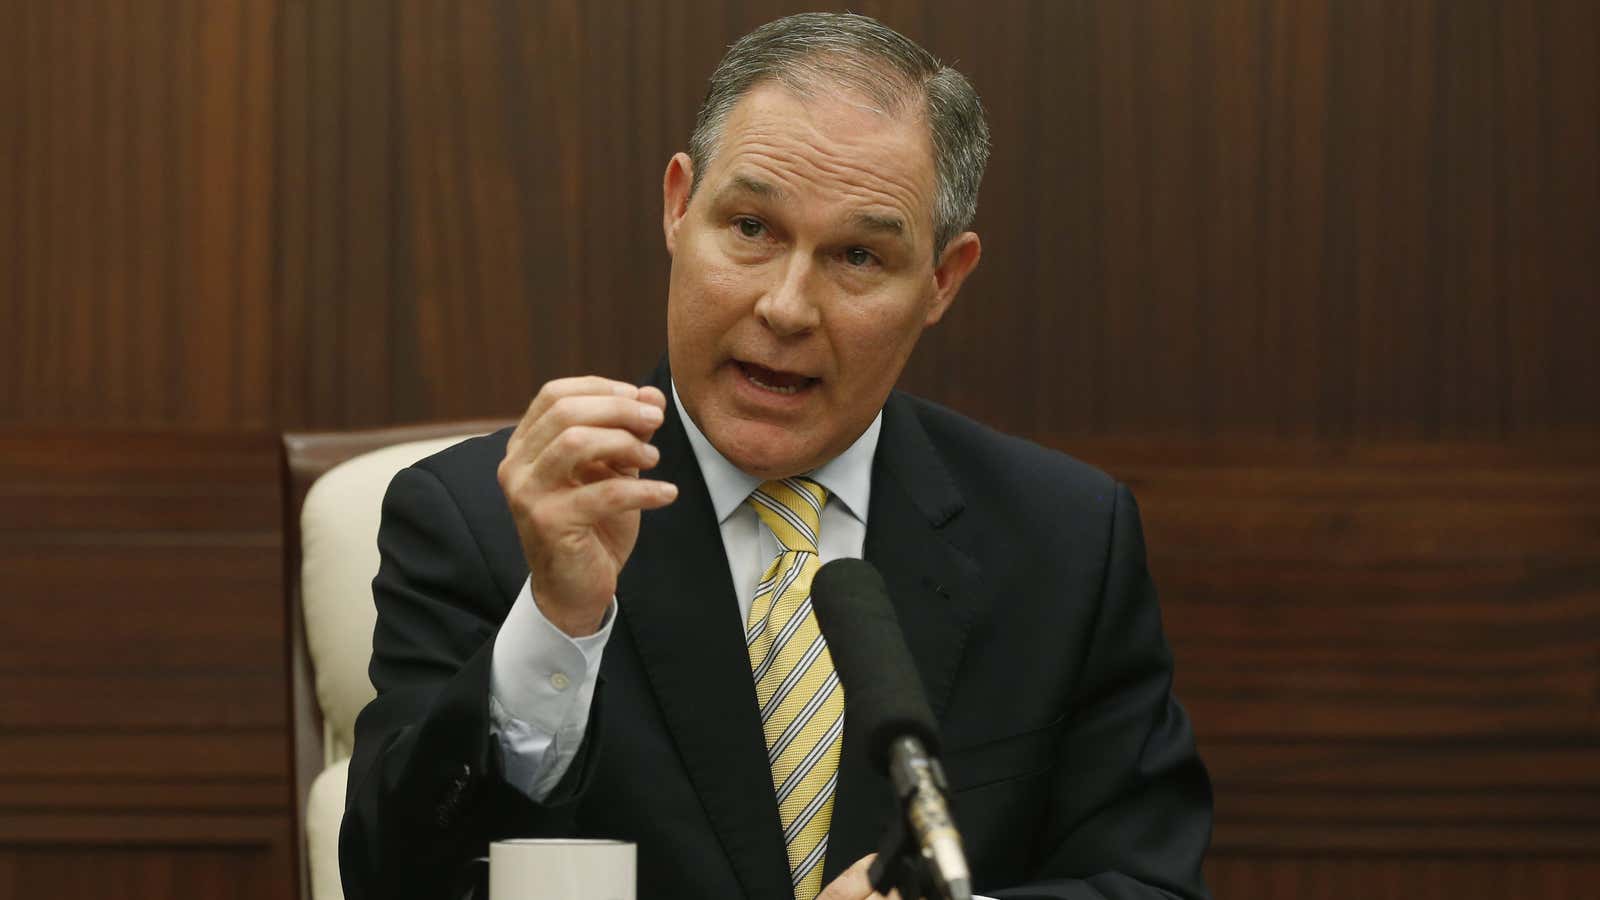 The EPA said the scientists were pulled because it wasn’t an EPA conference. But Scott Pruitt spoke to an energy industry conference in March.